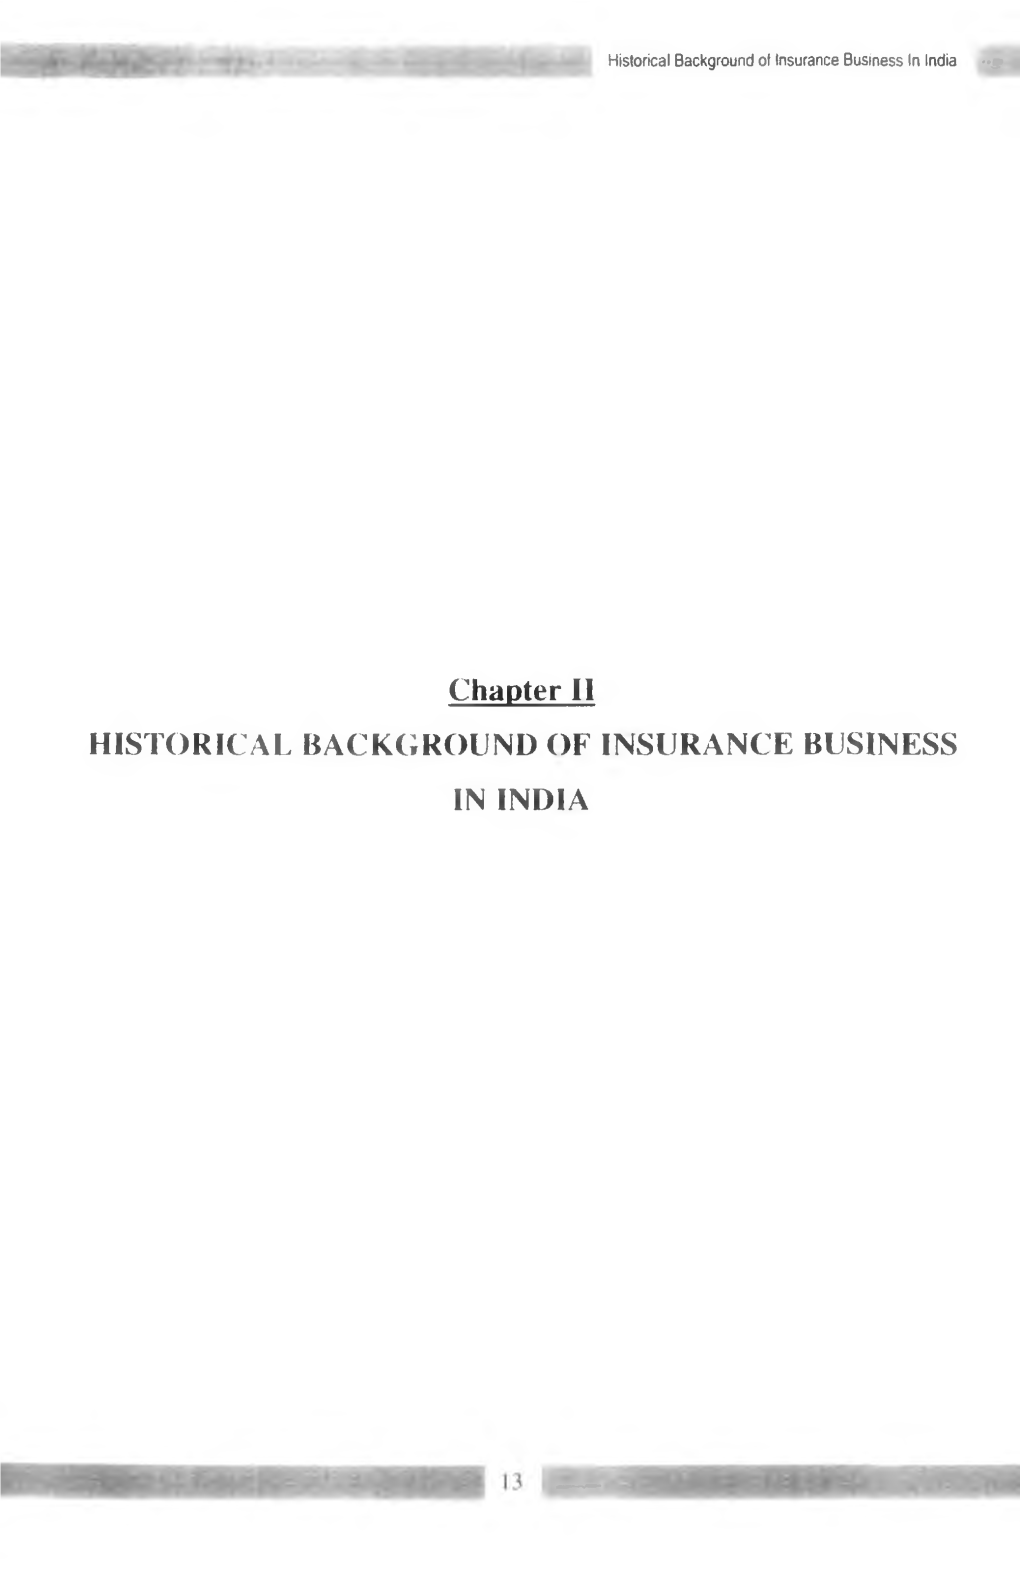 Chapter 11 HISTORICAL BACKGROUND of INSURANCE BUSINESS in INDIA ’ Historical Background of Insurance Business in India